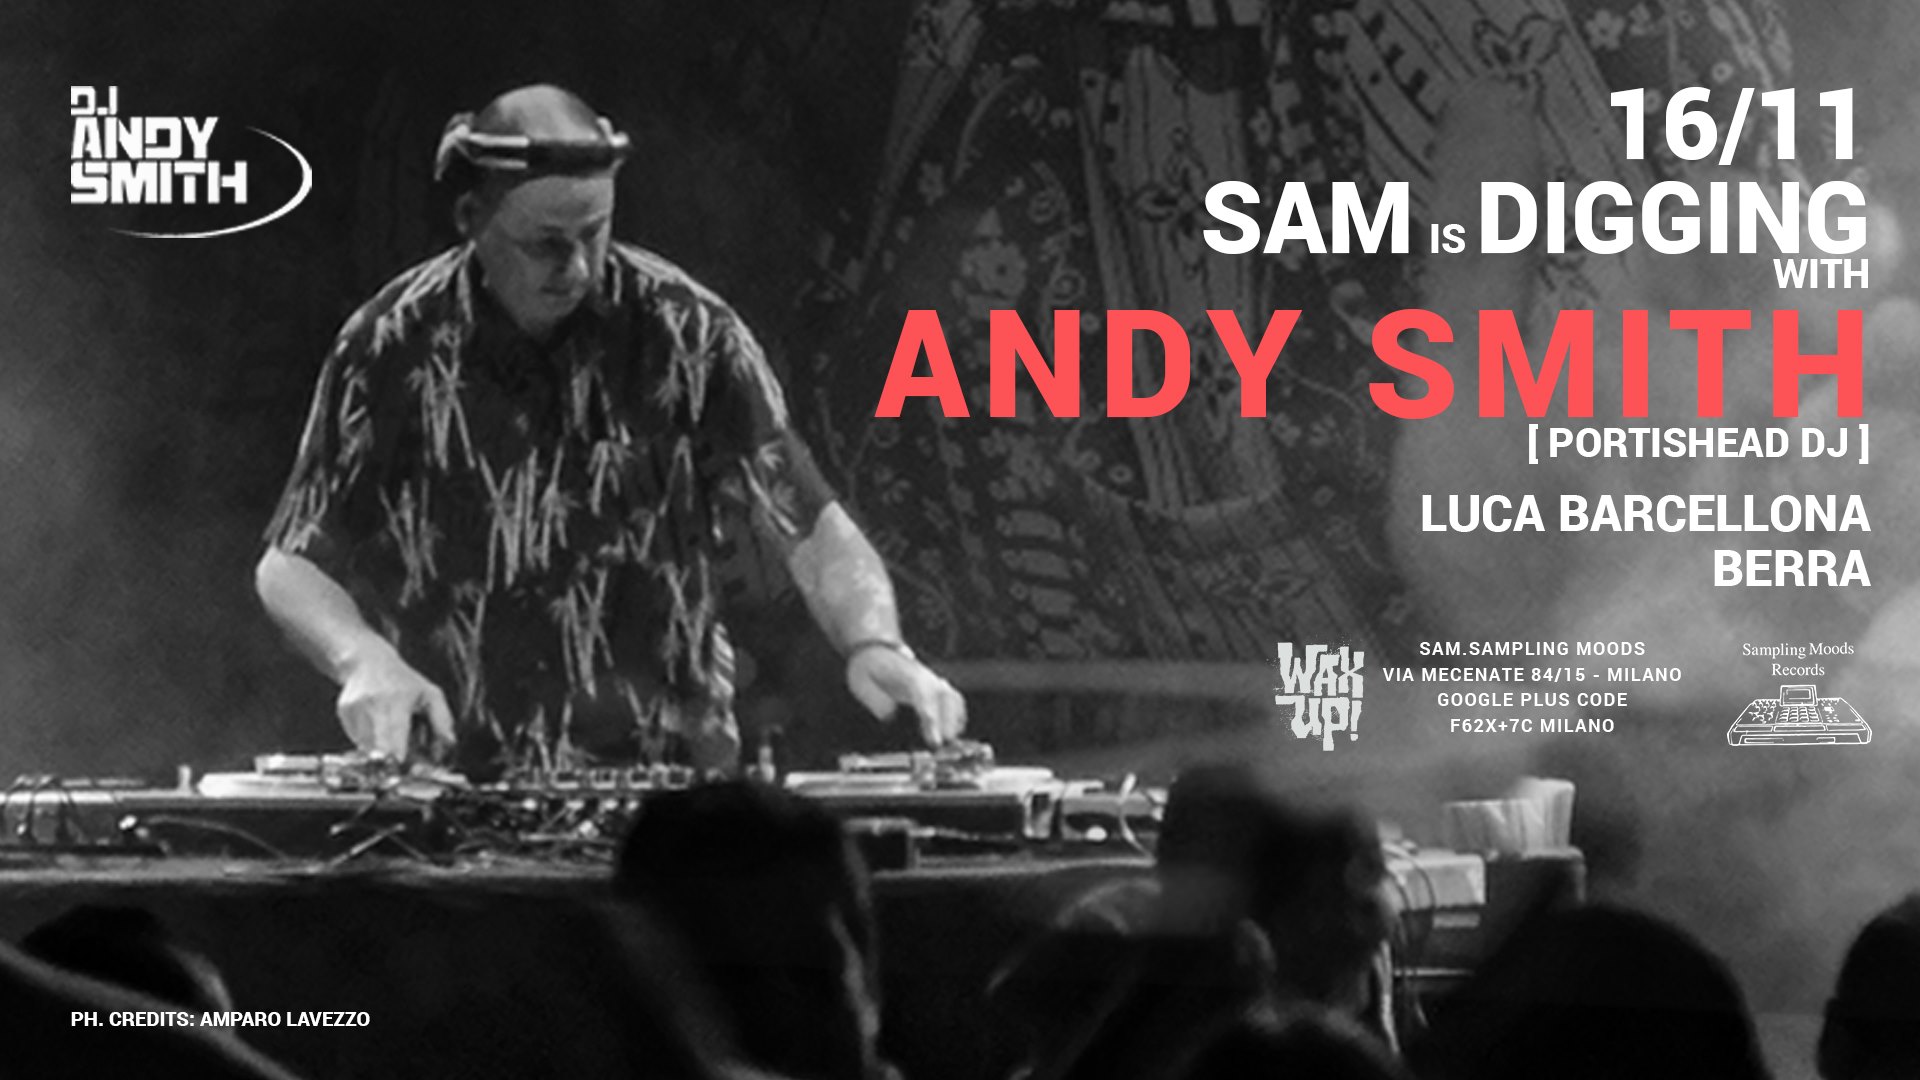 SAM is digging Andy Smith Luca Barcellona